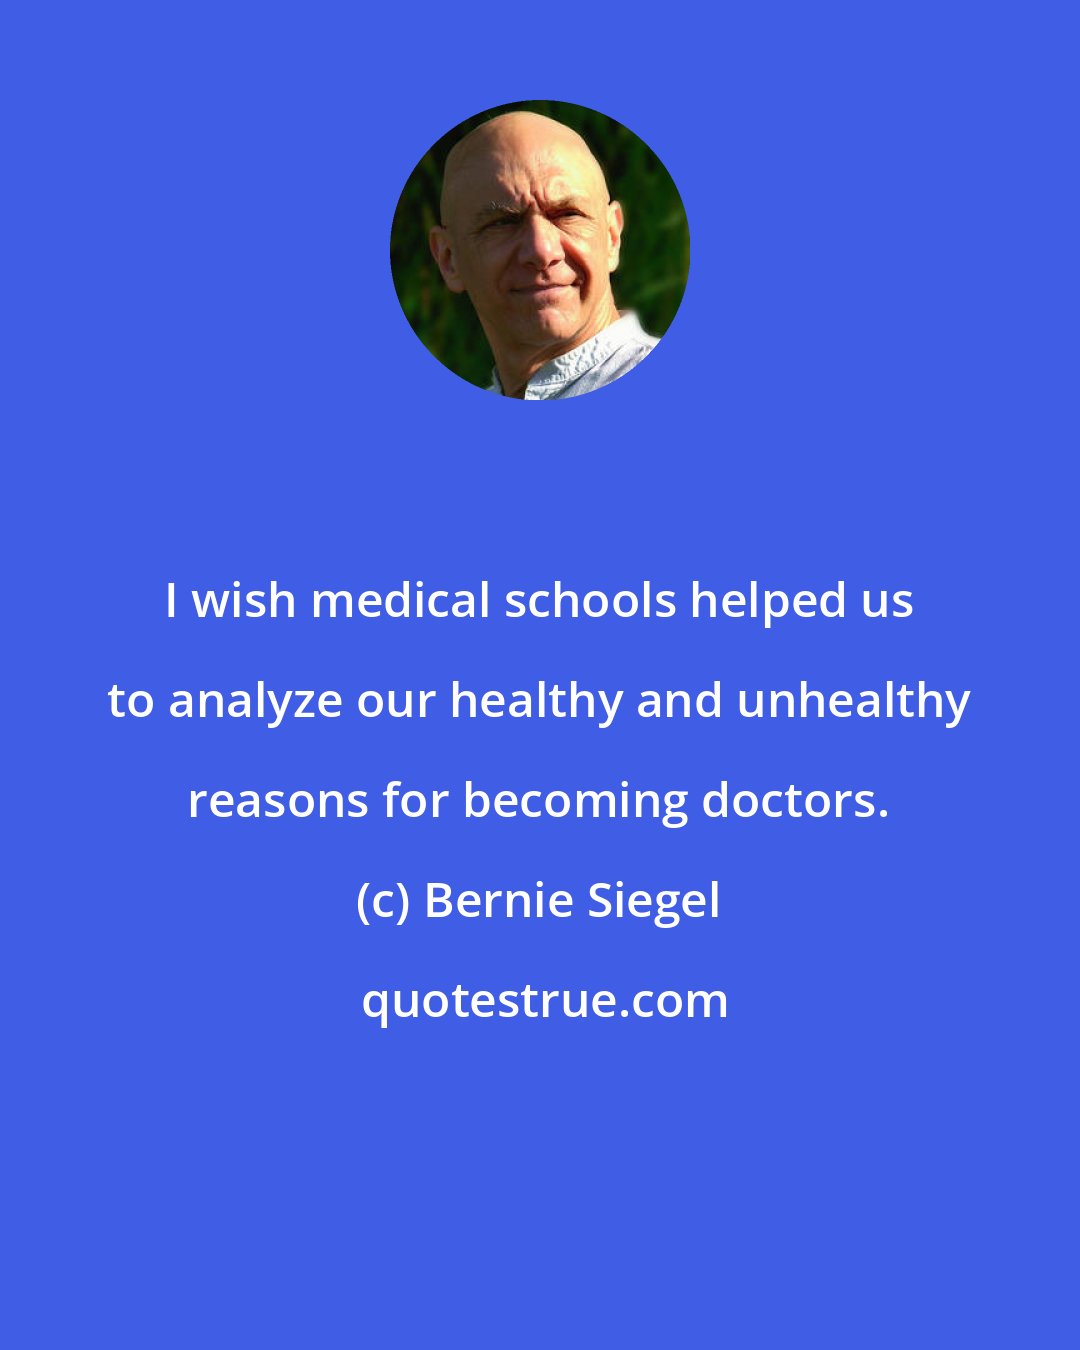 Bernie Siegel: I wish medical schools helped us to analyze our healthy and unhealthy reasons for becoming doctors.